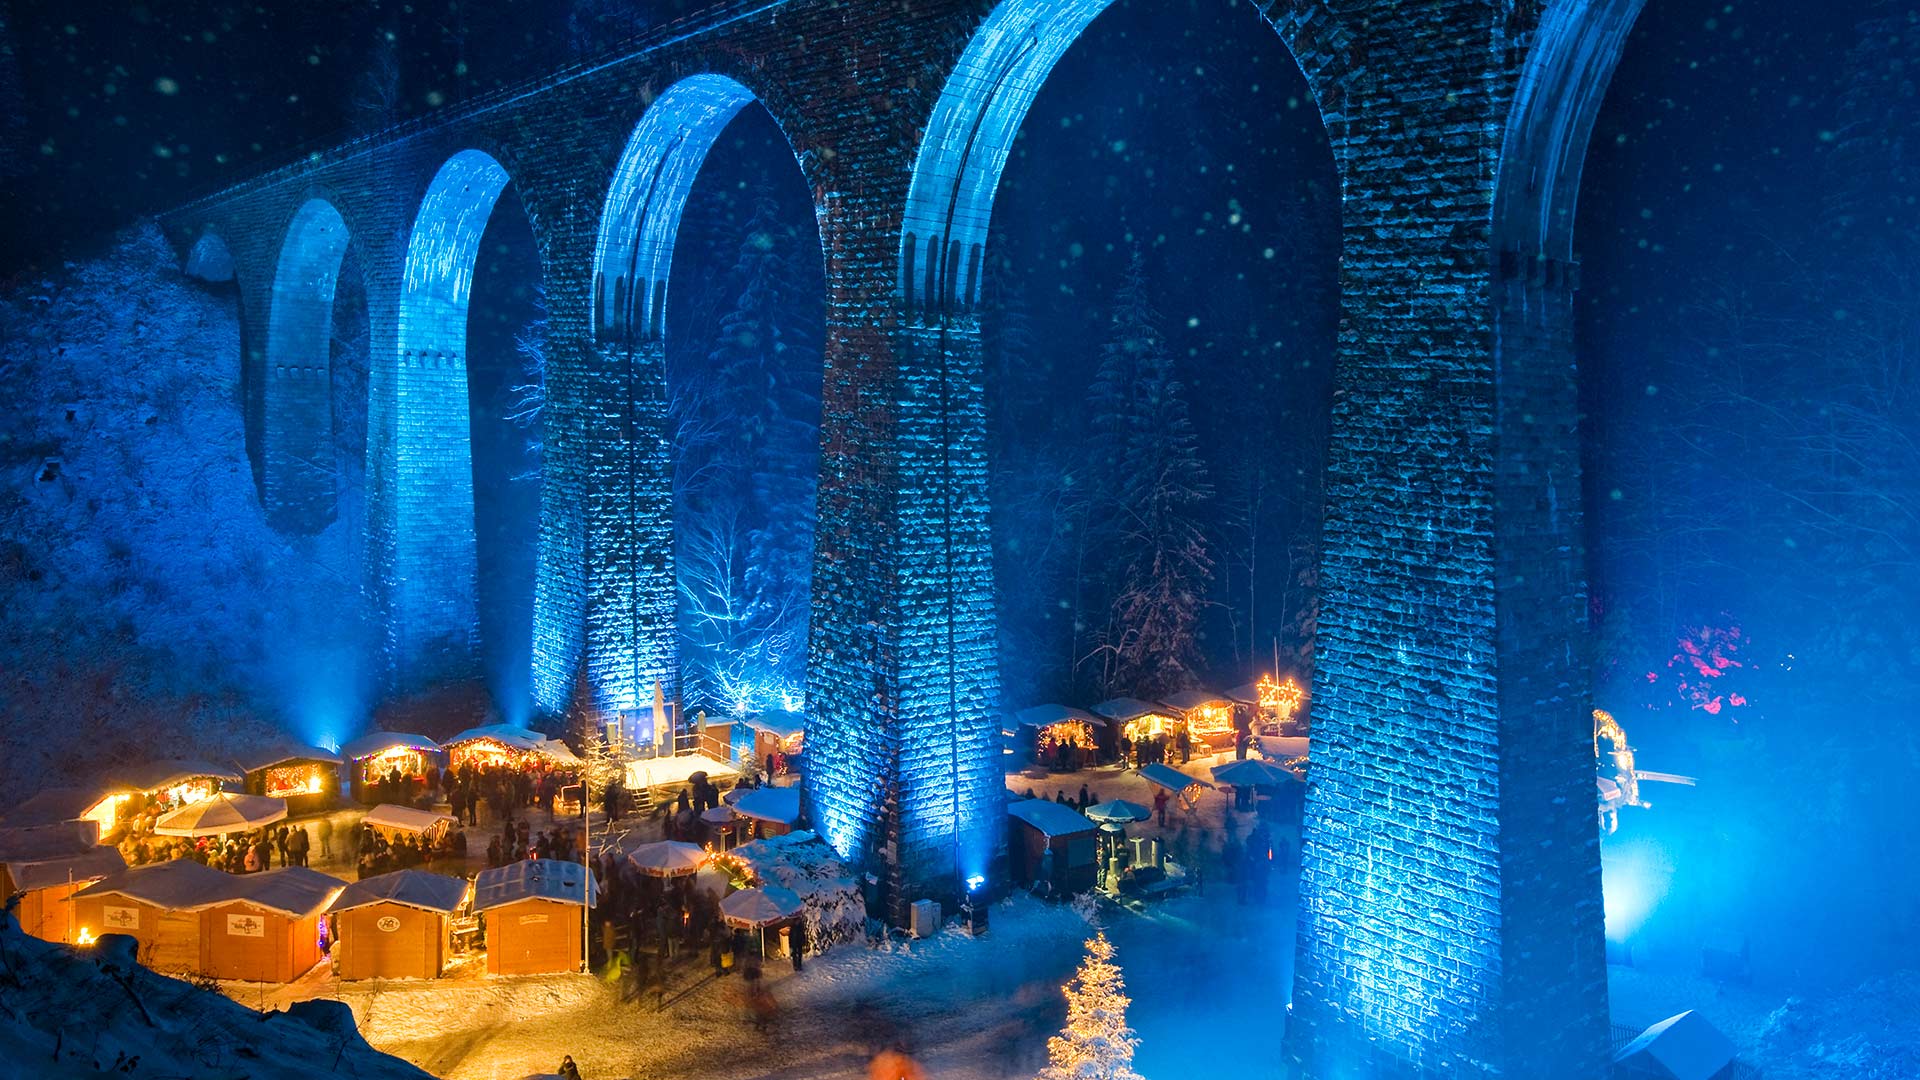 Christmas Markets In Europe l 7 Offbeat & Awesome Markets To Visit, Epicure & Culture